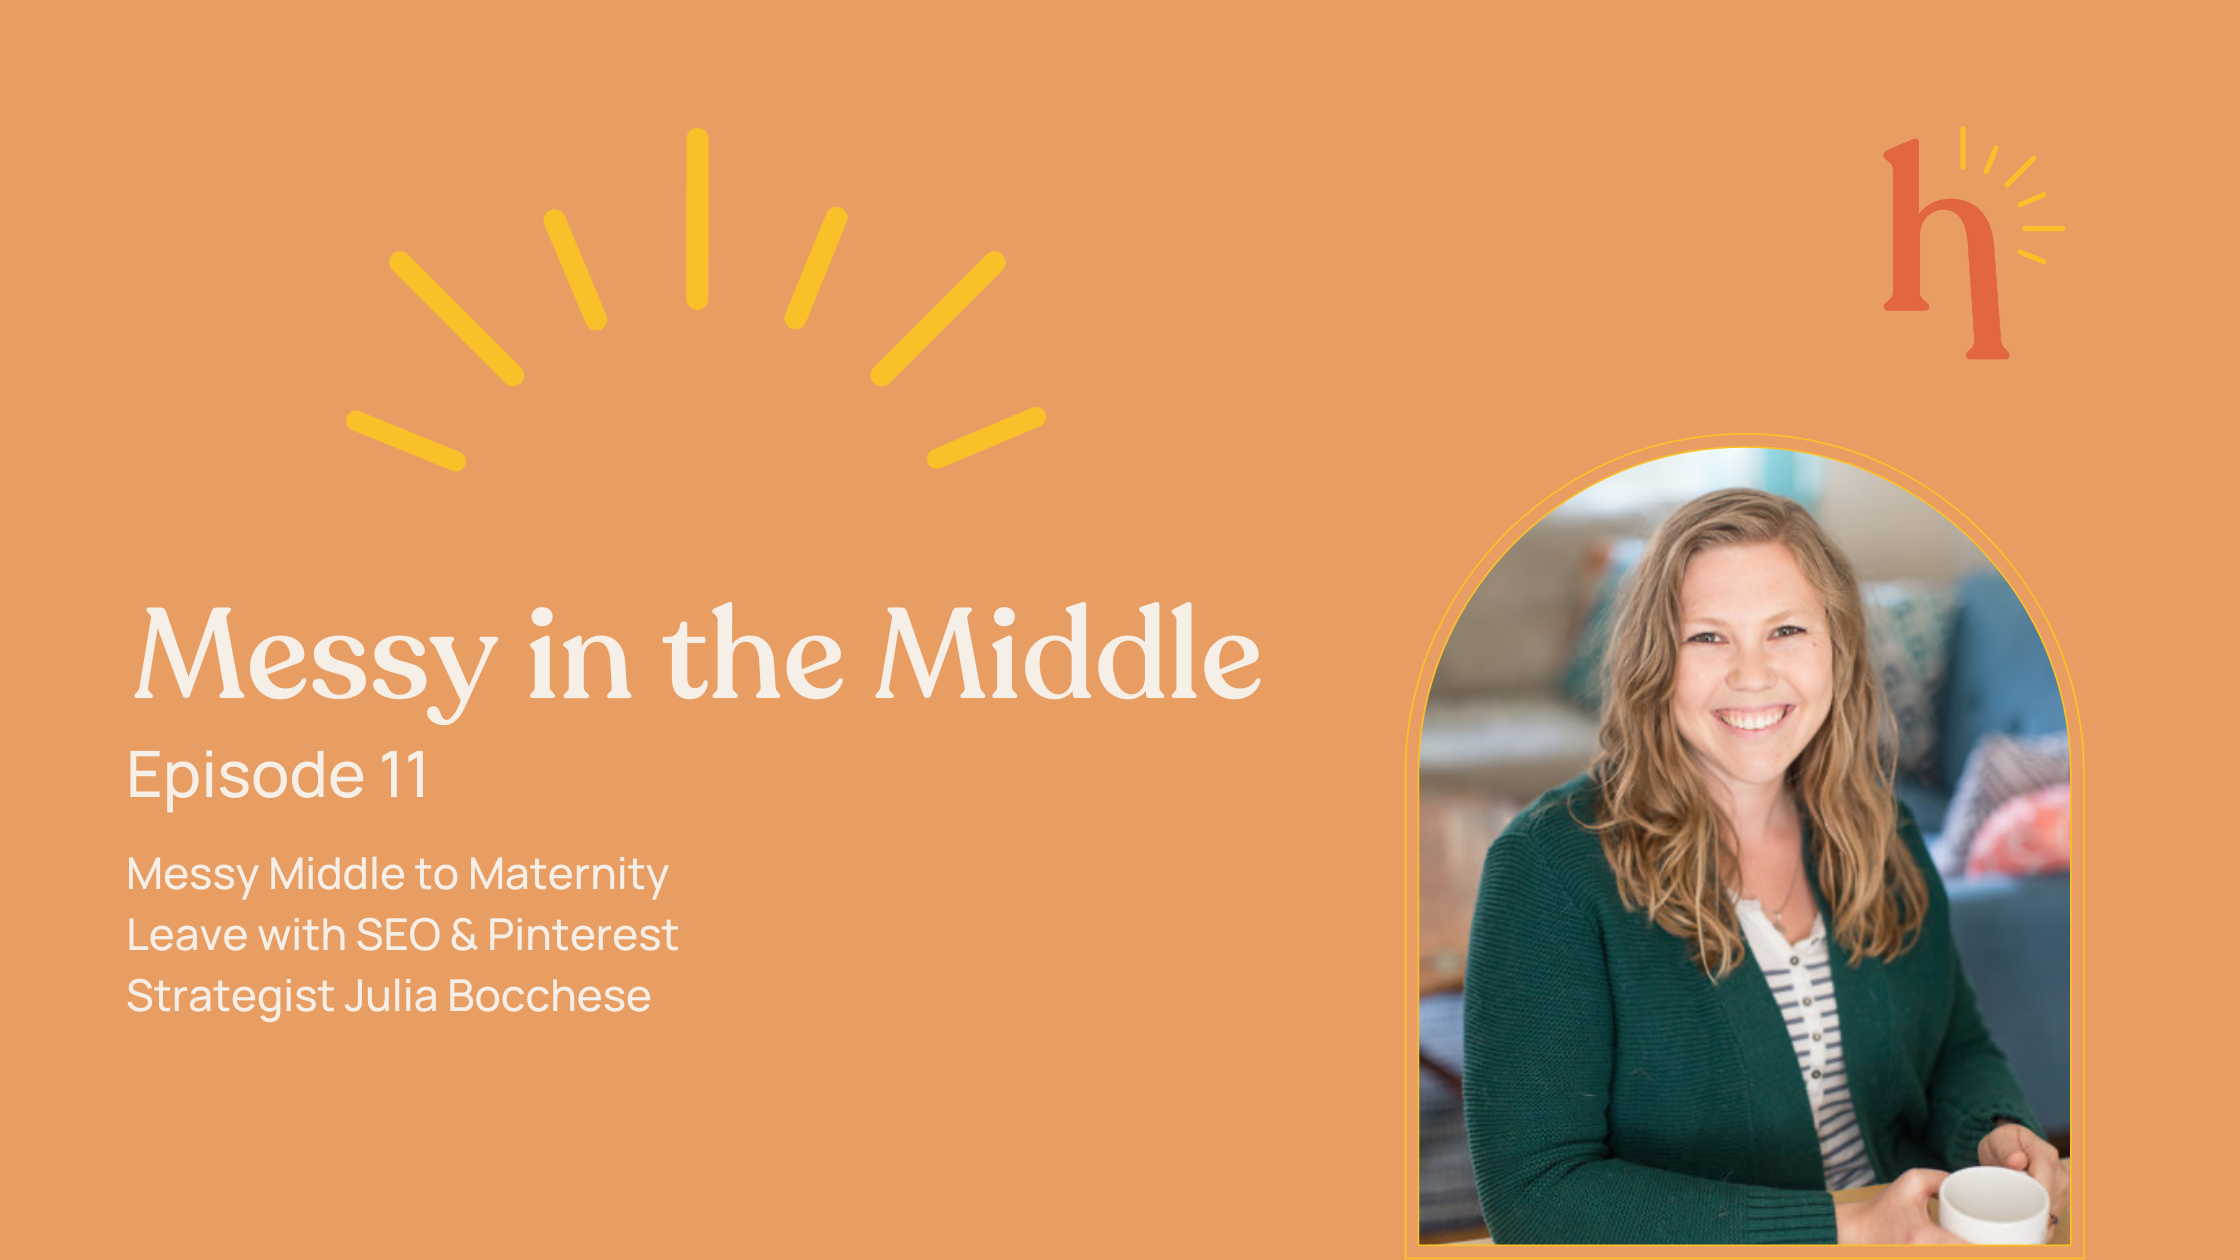 Messy Middle to Maternity Leave with SEO & Pinterest Strategist Julia Bocchese